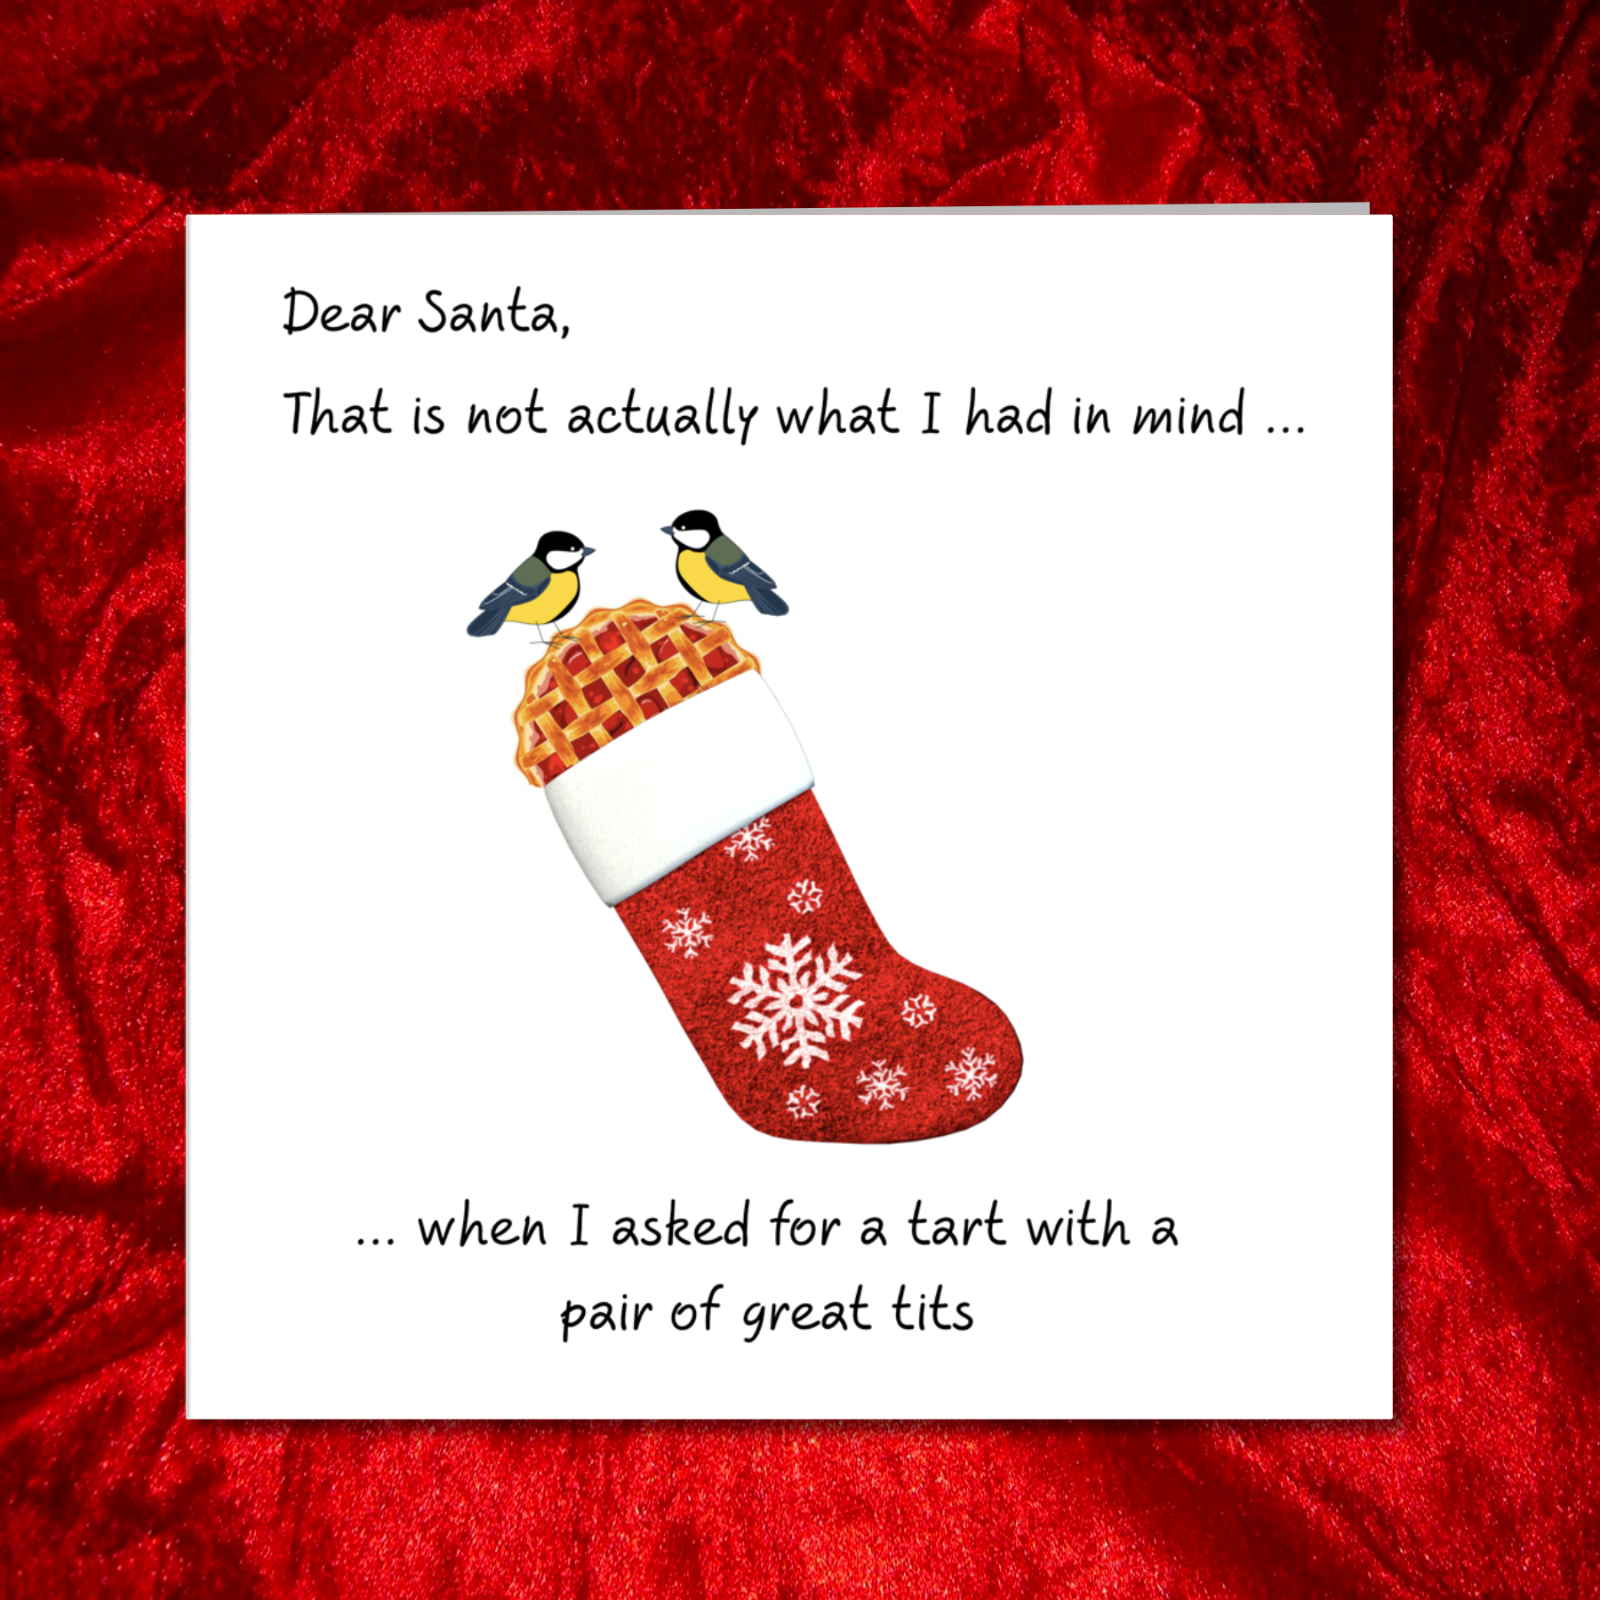 Bad Santa POETRY Weird Humor Classic Value Funny Large Christmas Stocking